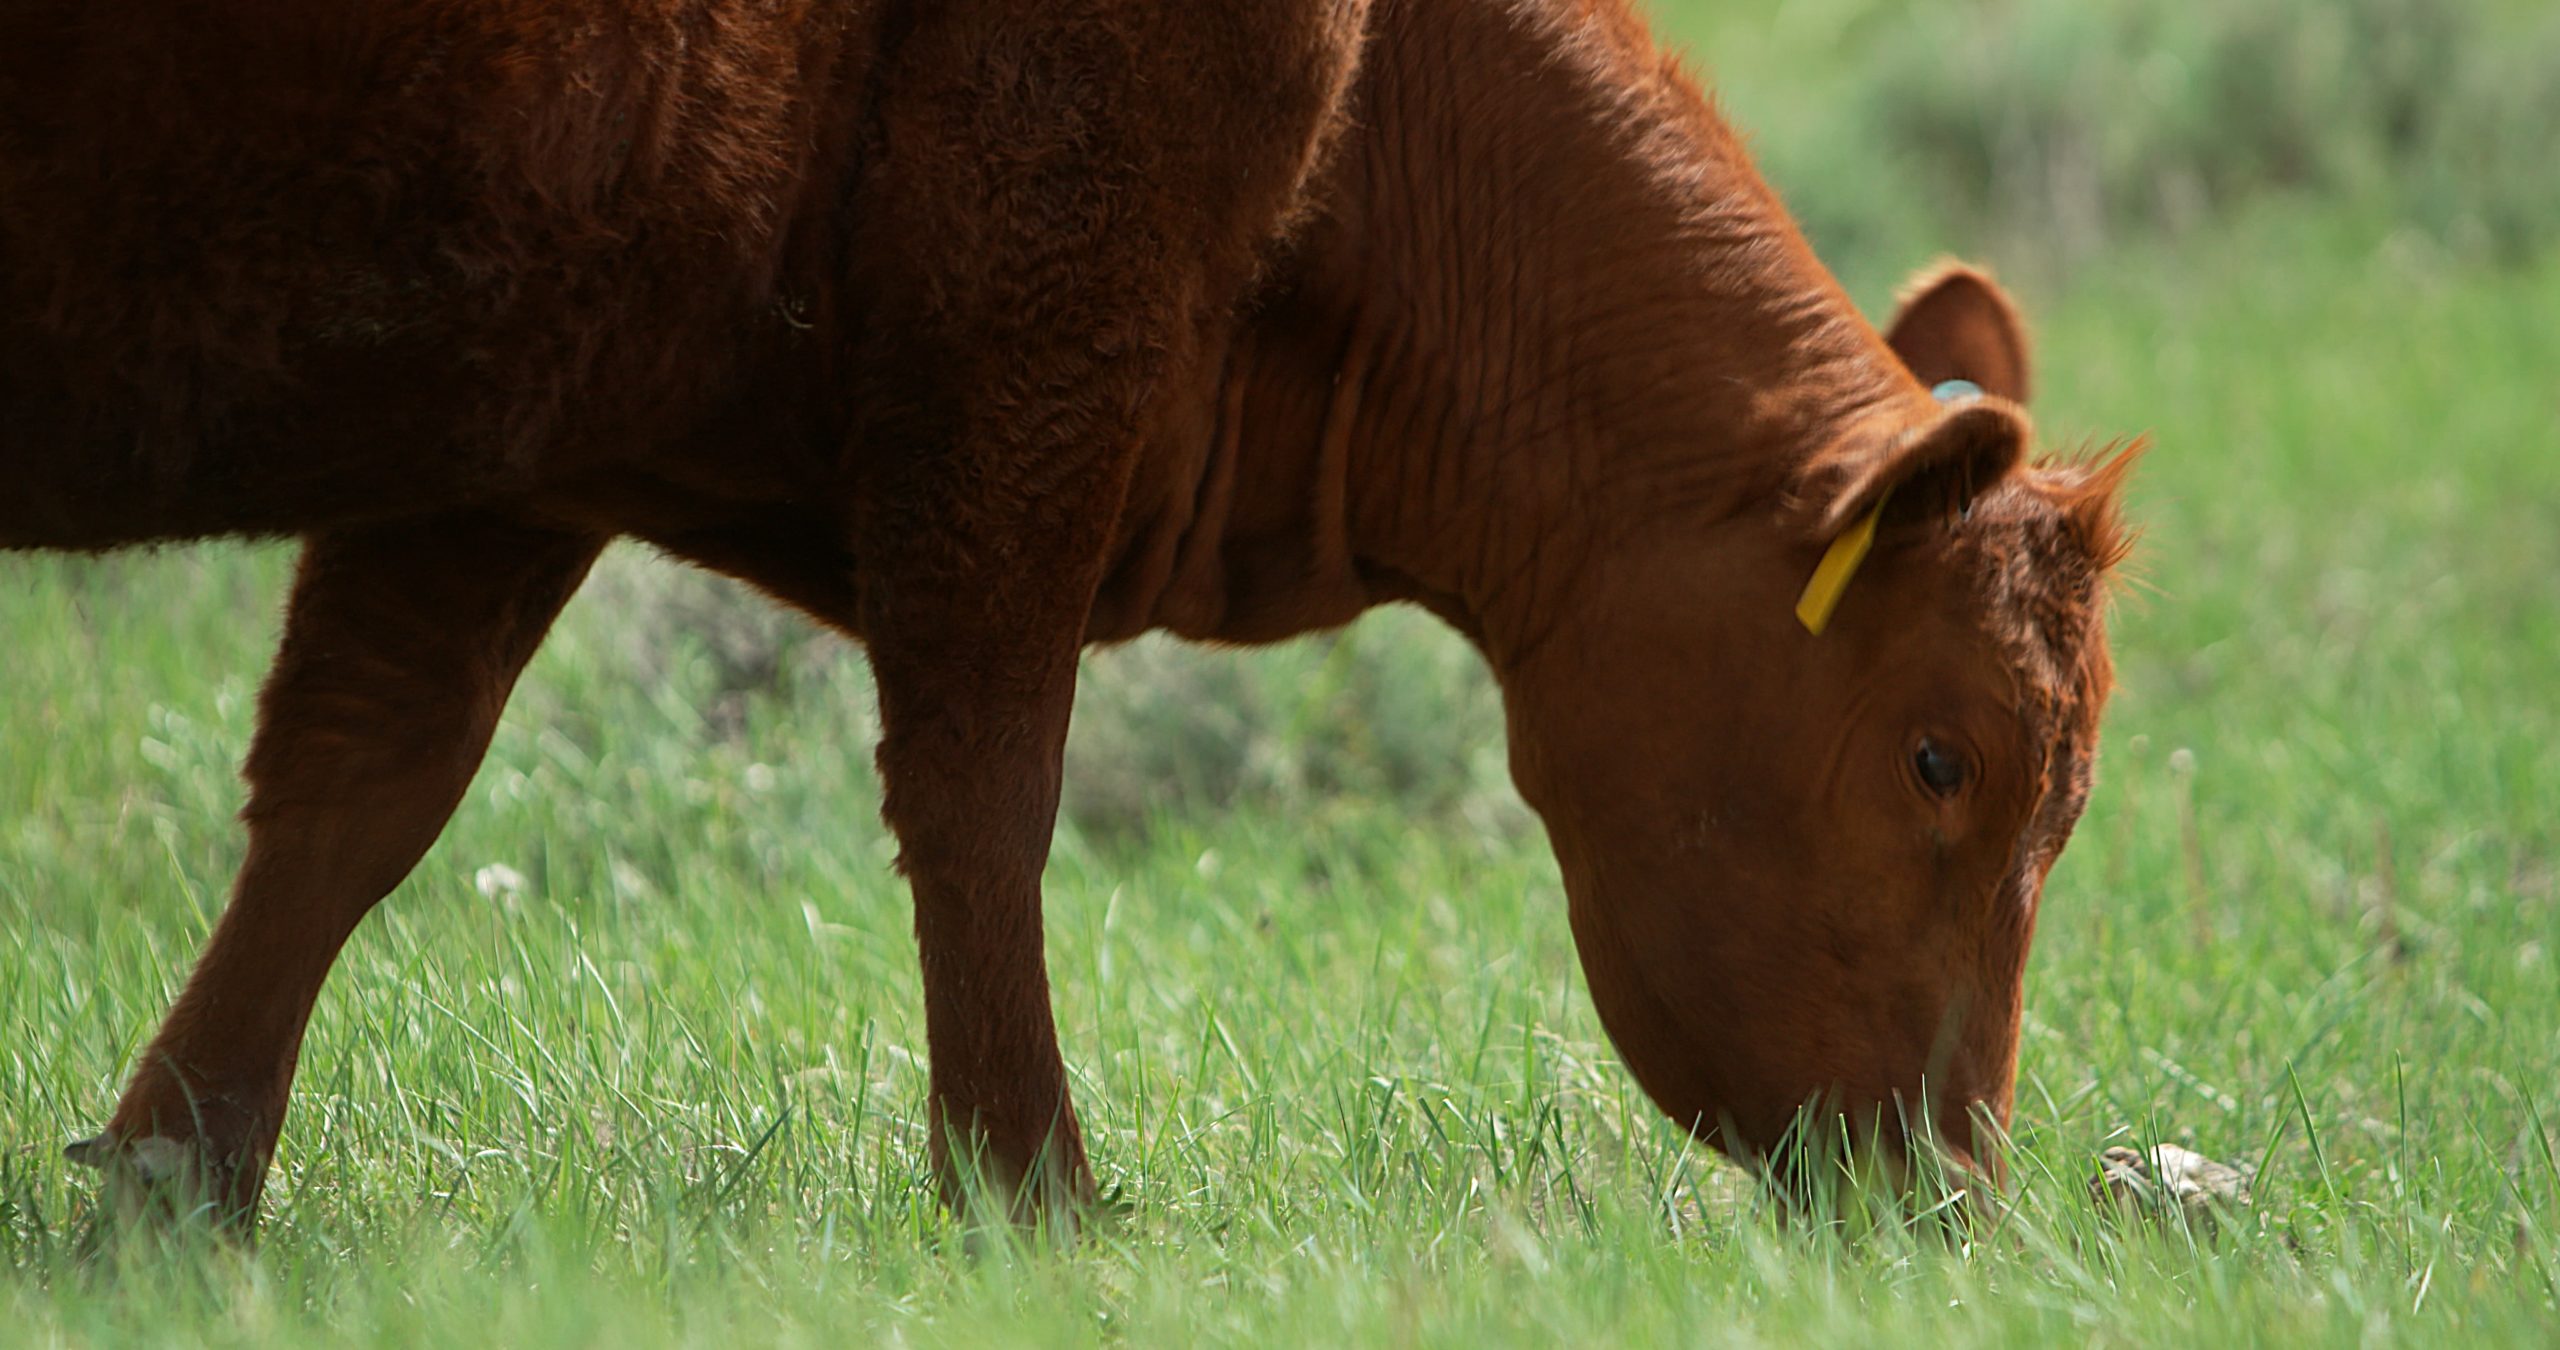 A brown cow grazing on grass